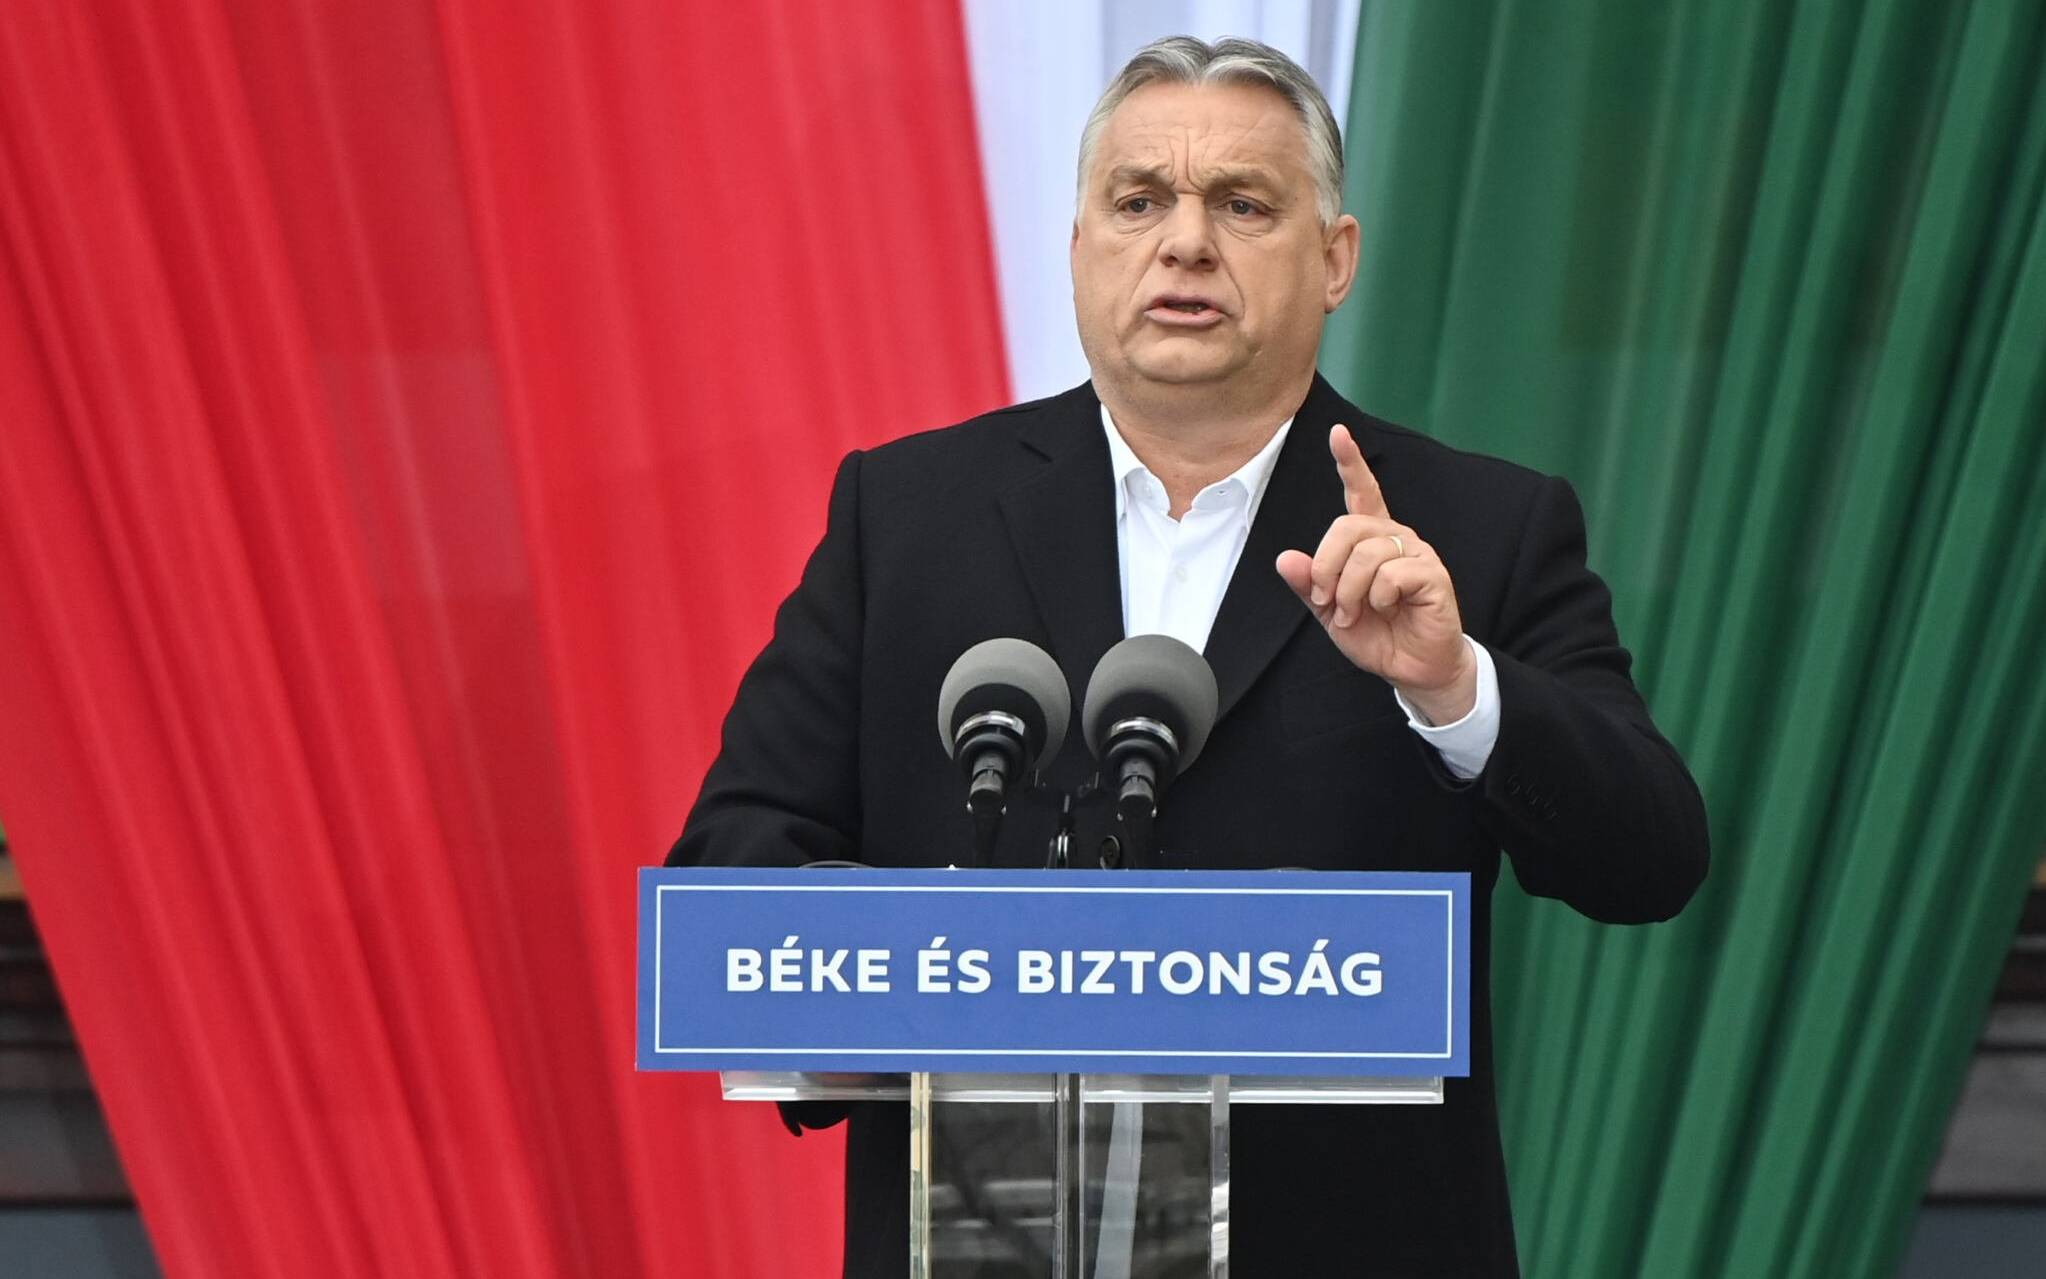 Hungarian Prime Minister Viktor Orban speaks on stage during the closing campaign session of the FIDESZ party, in Szekesfehervar, Hungary on April 1, 2022. - Hungary's Prime Minister Viktor Orban, who is standing for a fourth term on April 3, 2022, has alarmed critics at home and abroad with crackdowns on civil liberties and fierce rhetoric. (Photo by Attila KISBENEDEK / AFP)